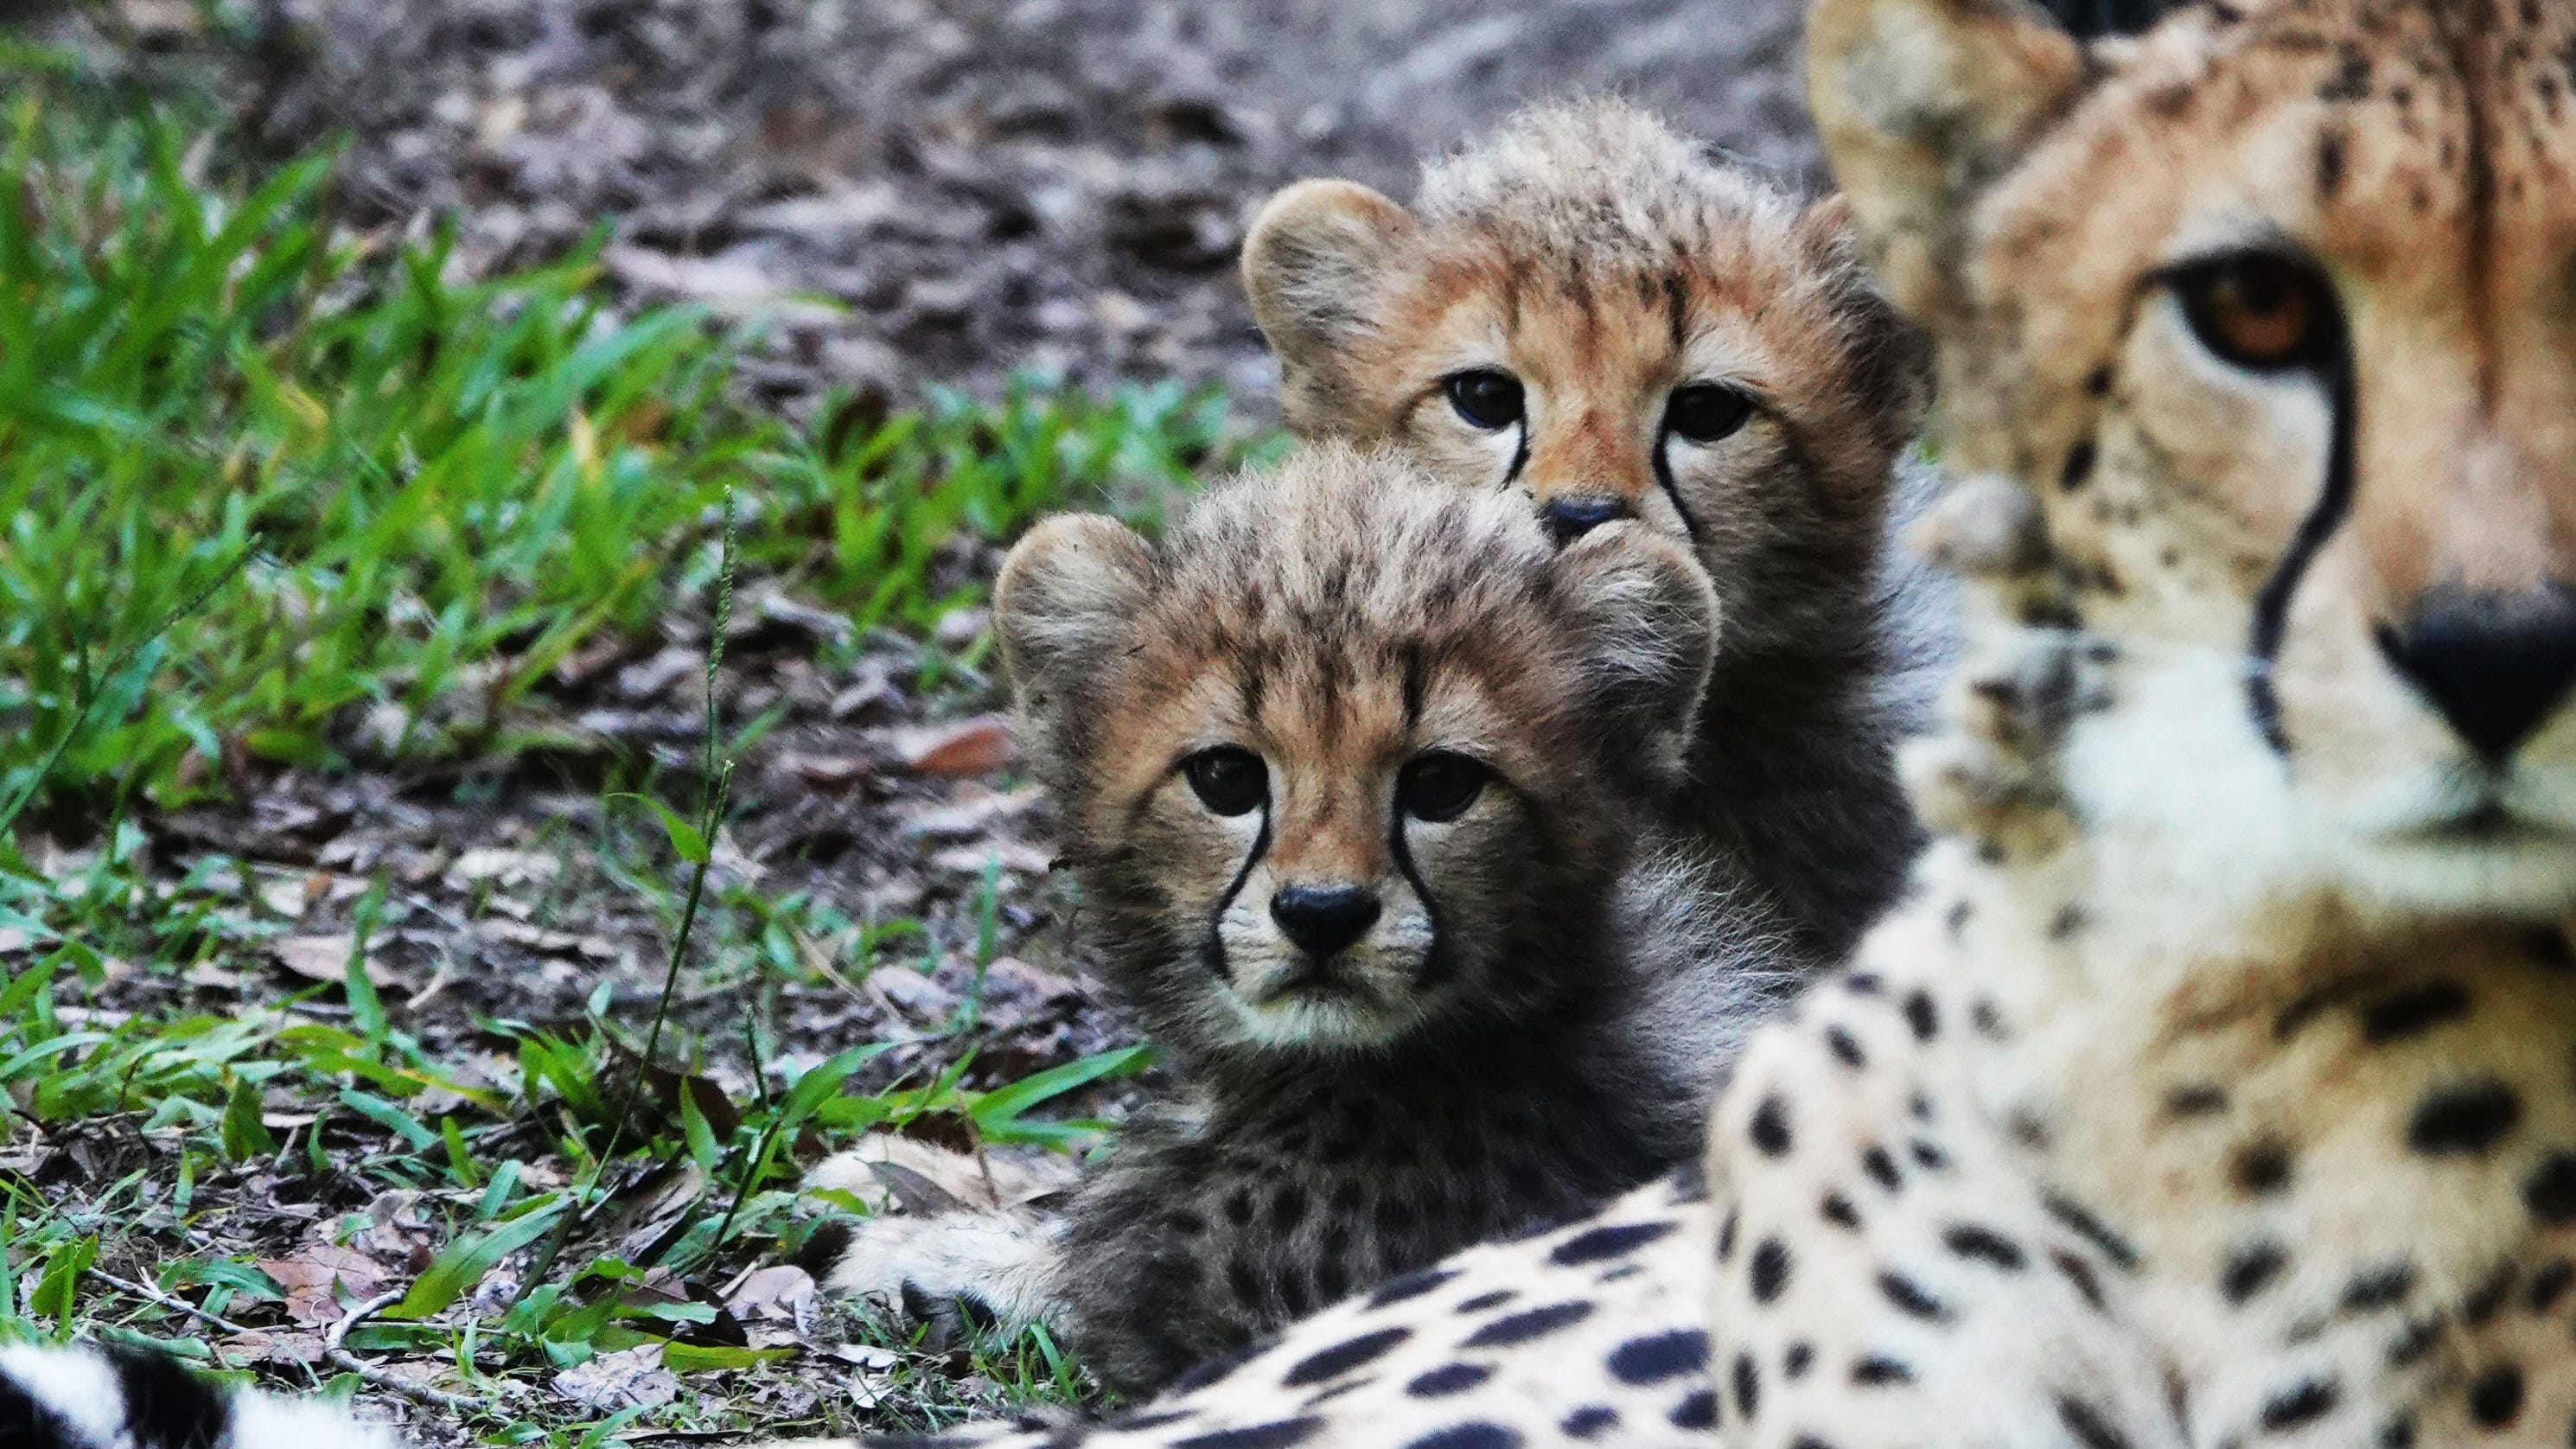 Cheetah cubs born at White Oak Conservation in Yulee, Florida